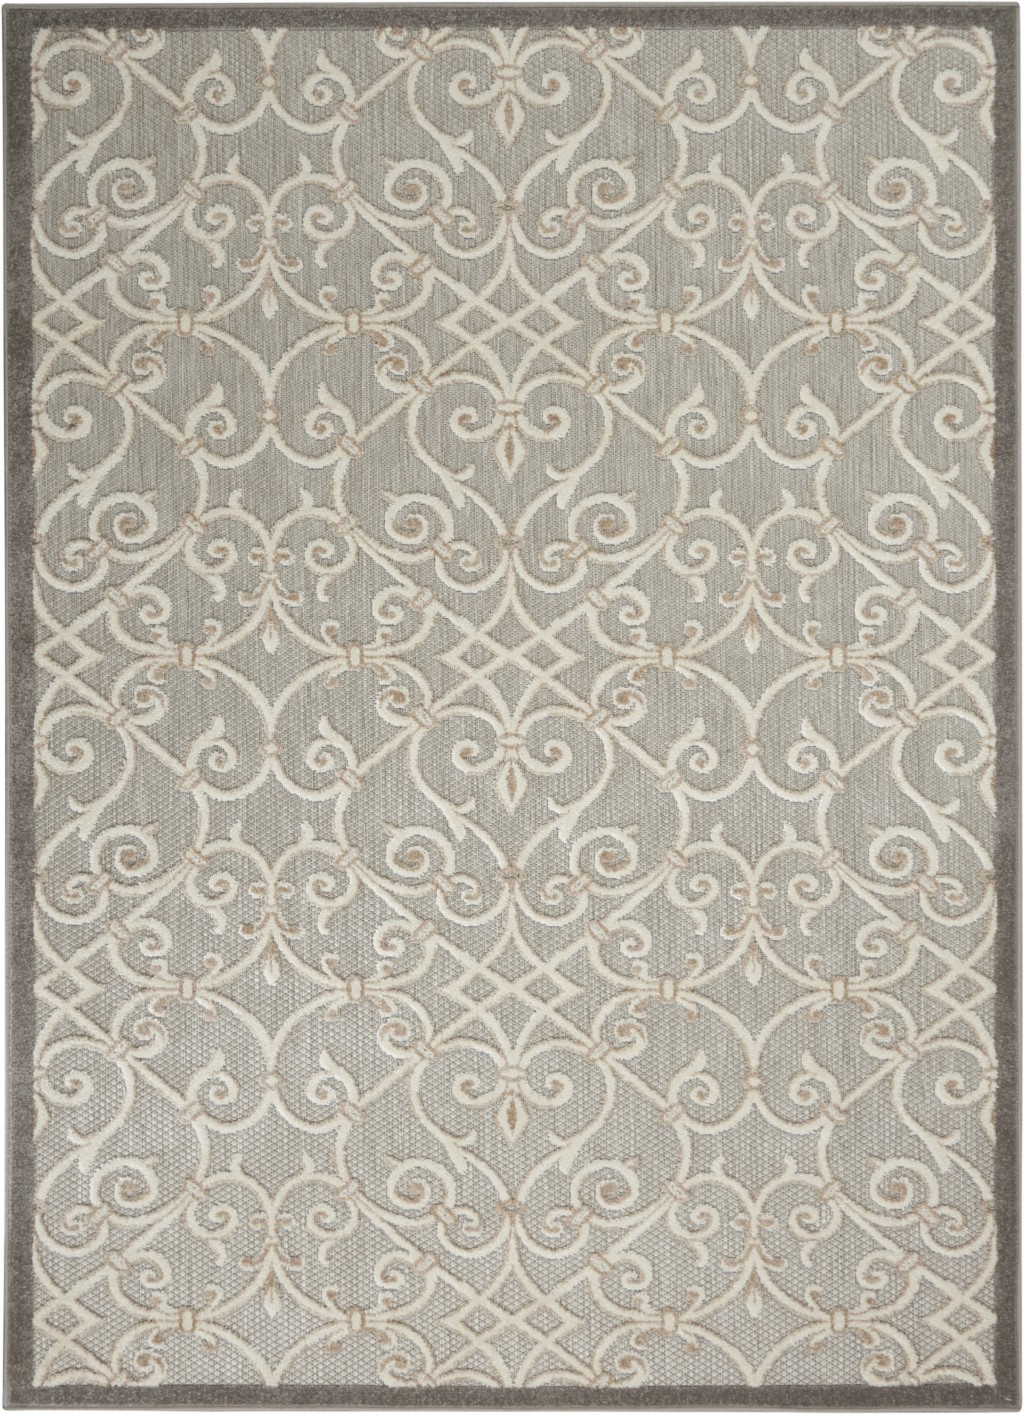 4' X 6' Gray And Ivory Floral Indoor Outdoor Area Rug-385049-1